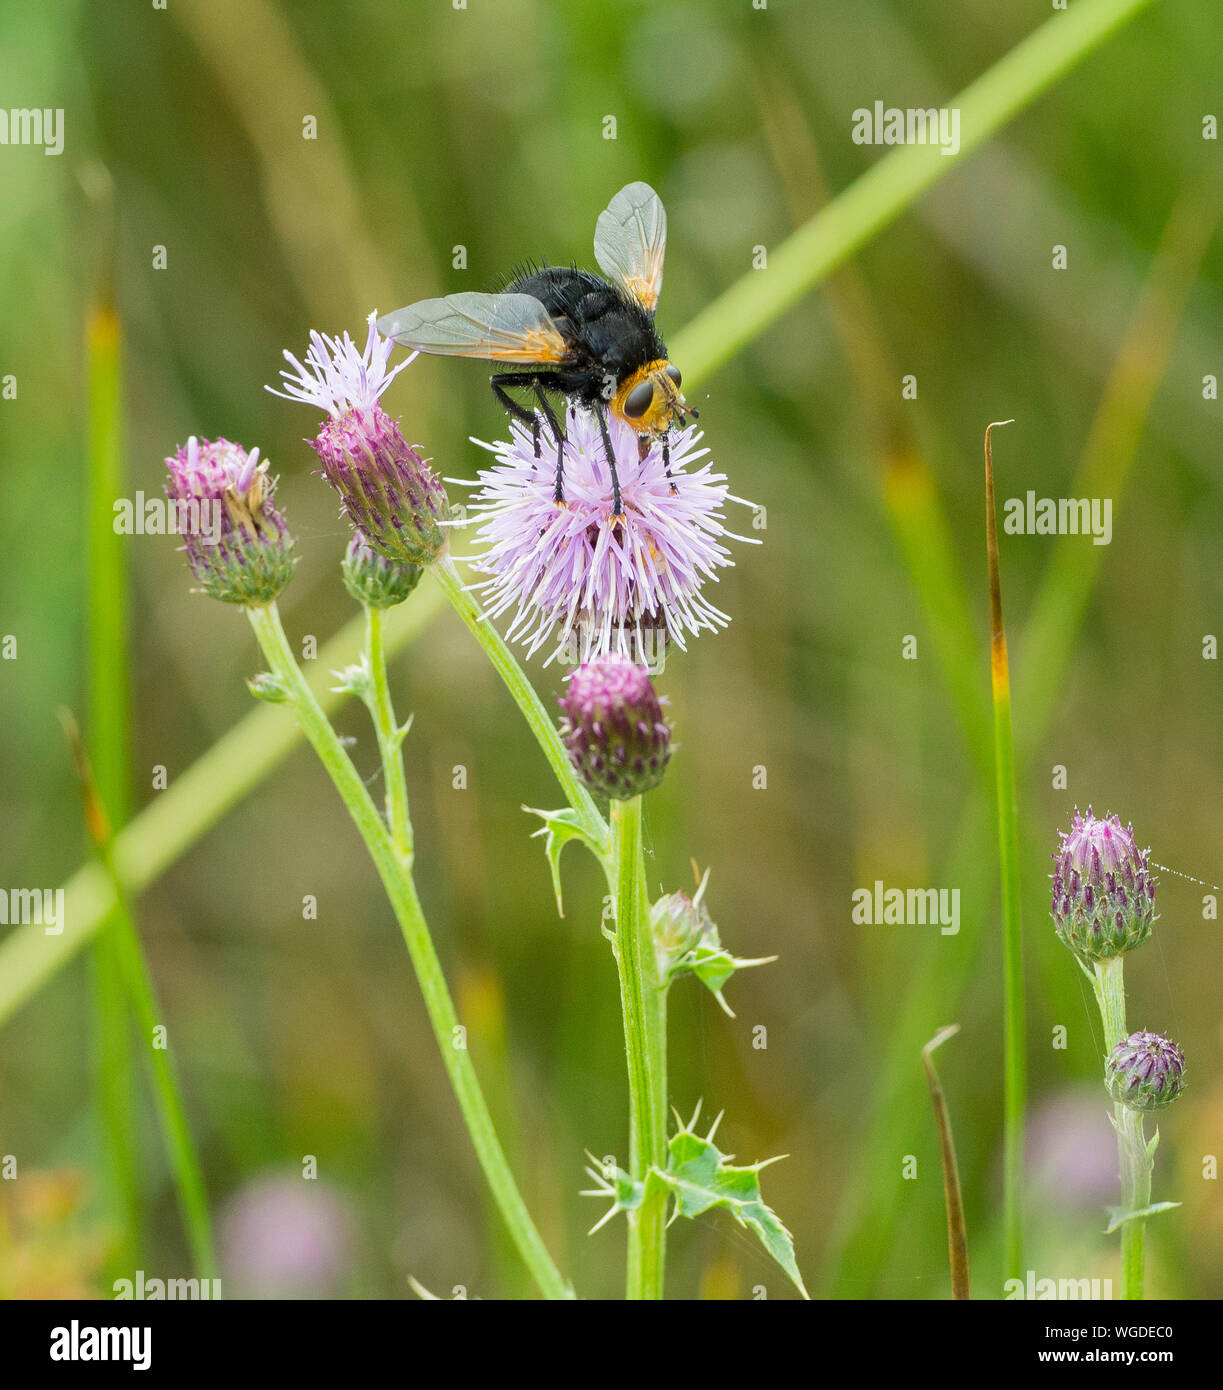 Giant Tachinid Fly (Tachina grossa) on a pink thistle flower. Stock Photo